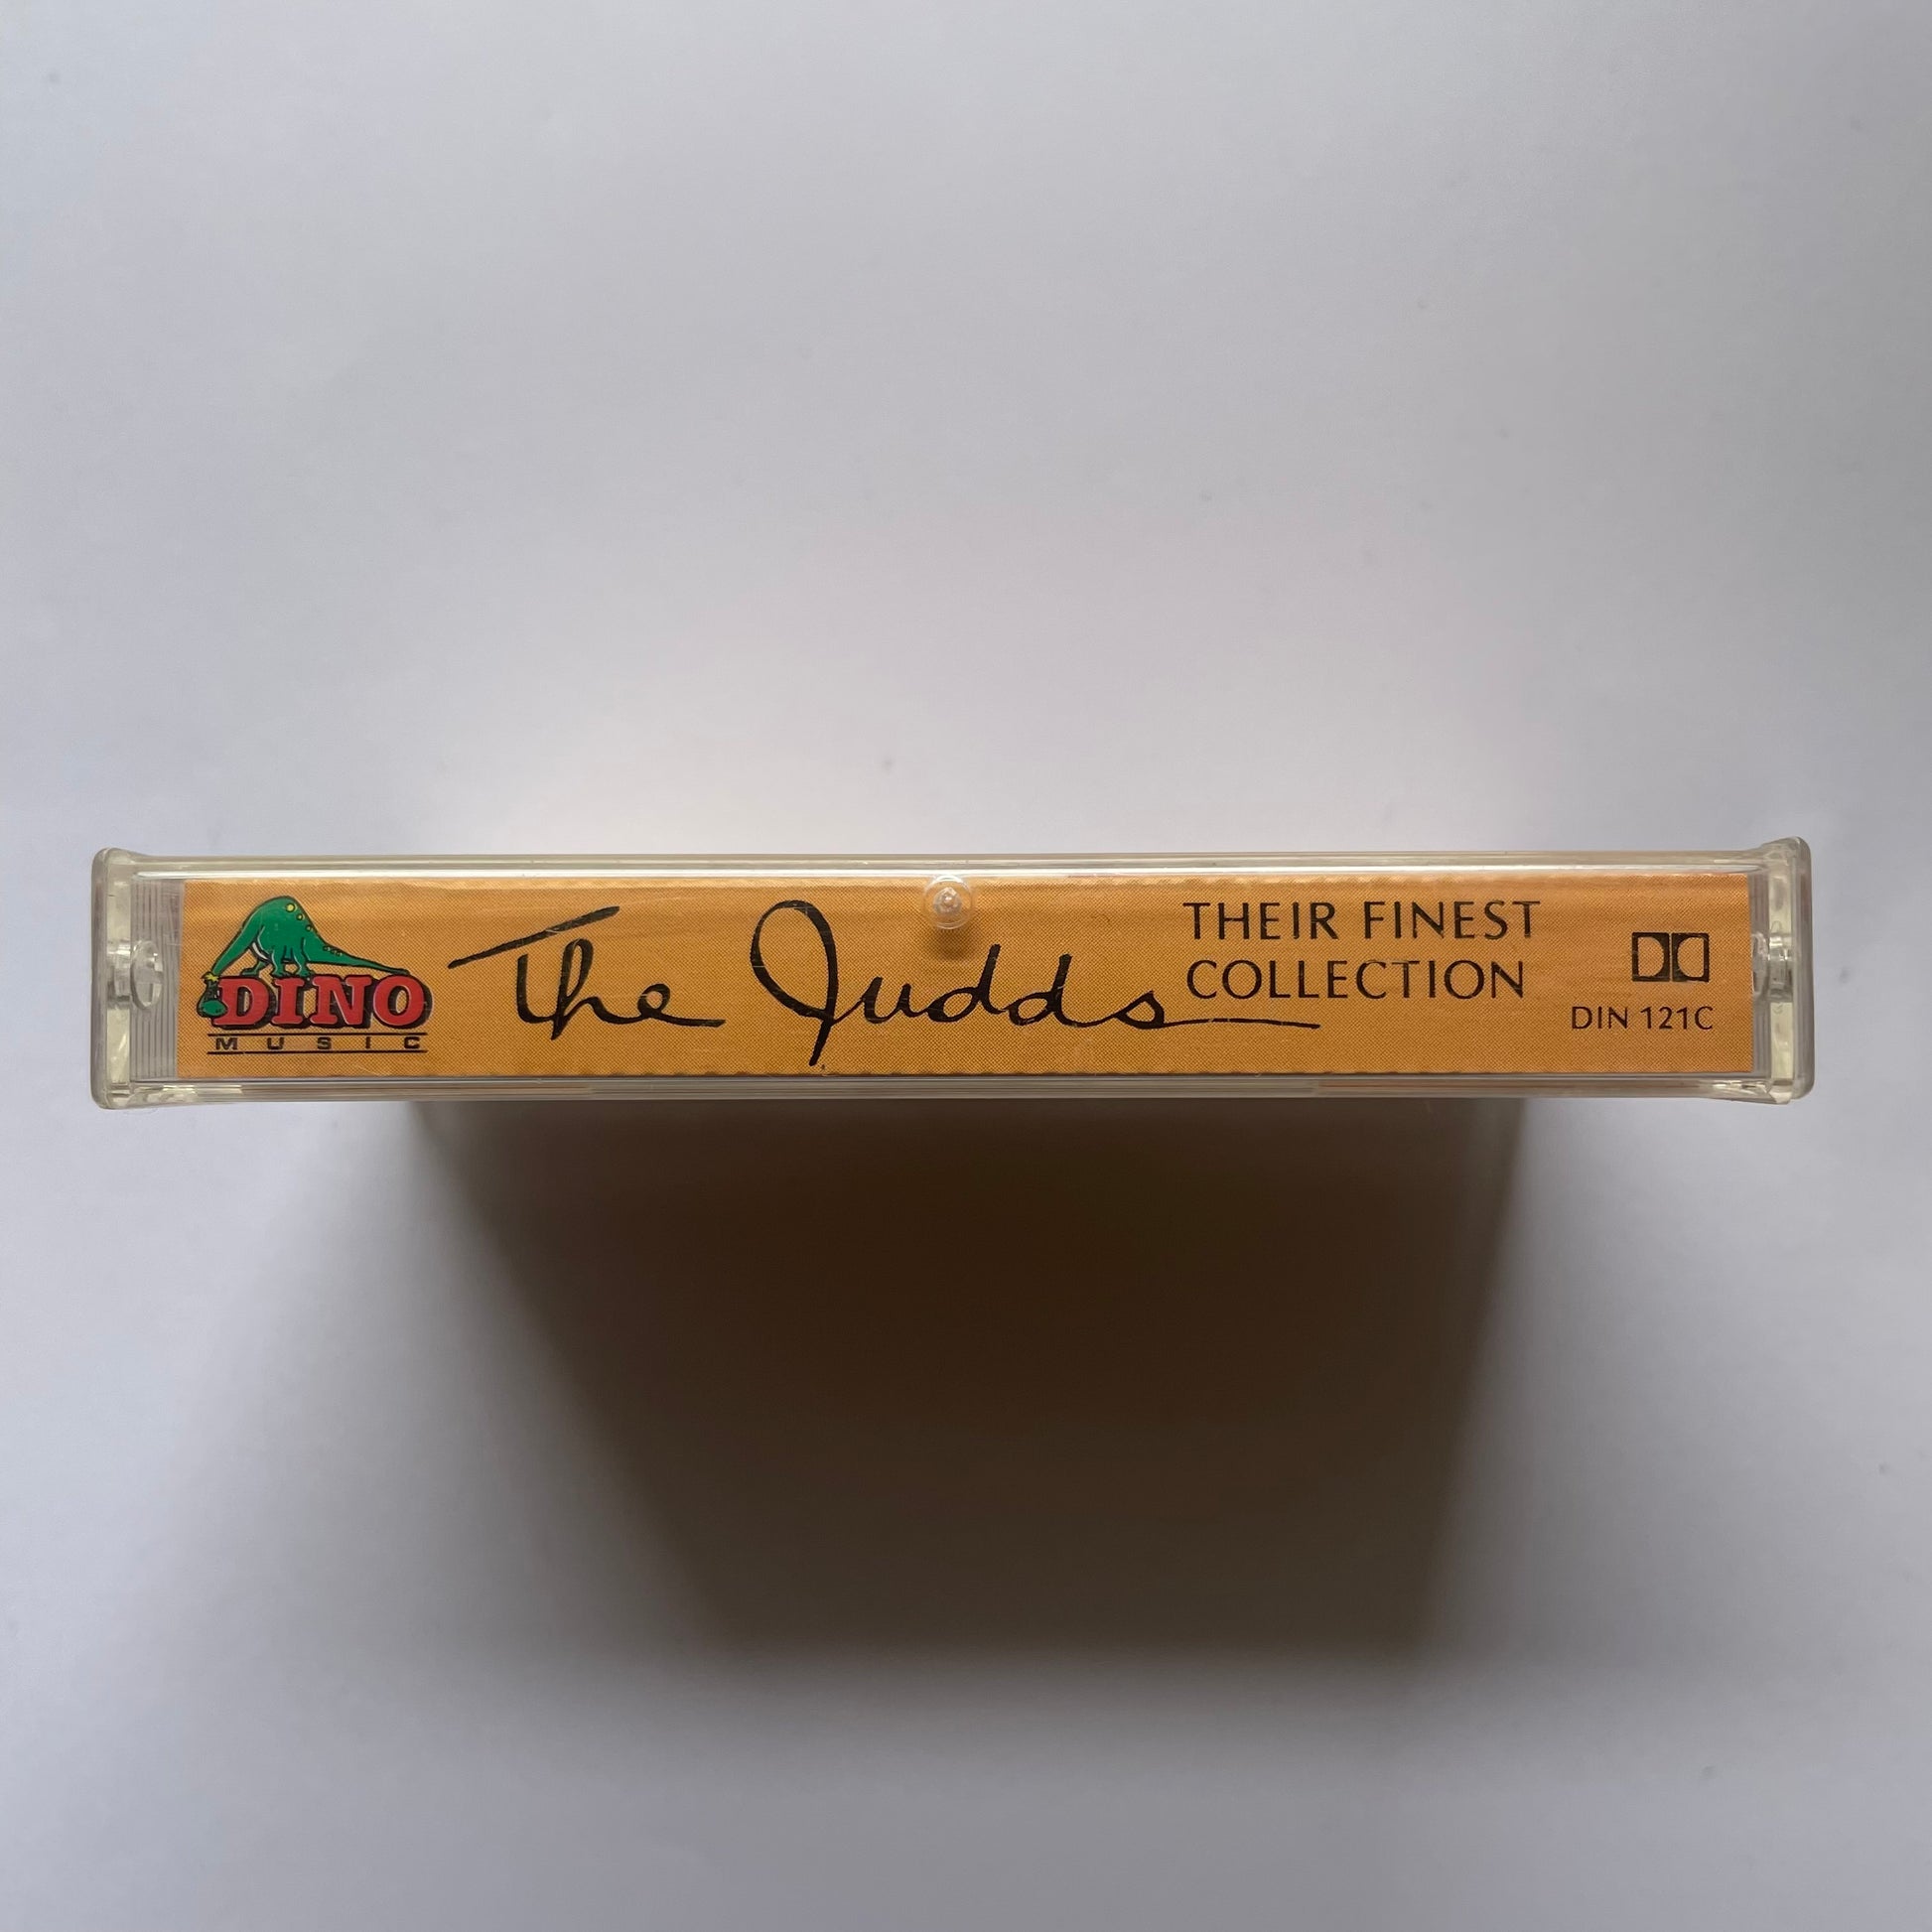 Tape Cassette The Judds Their Finest Collection title